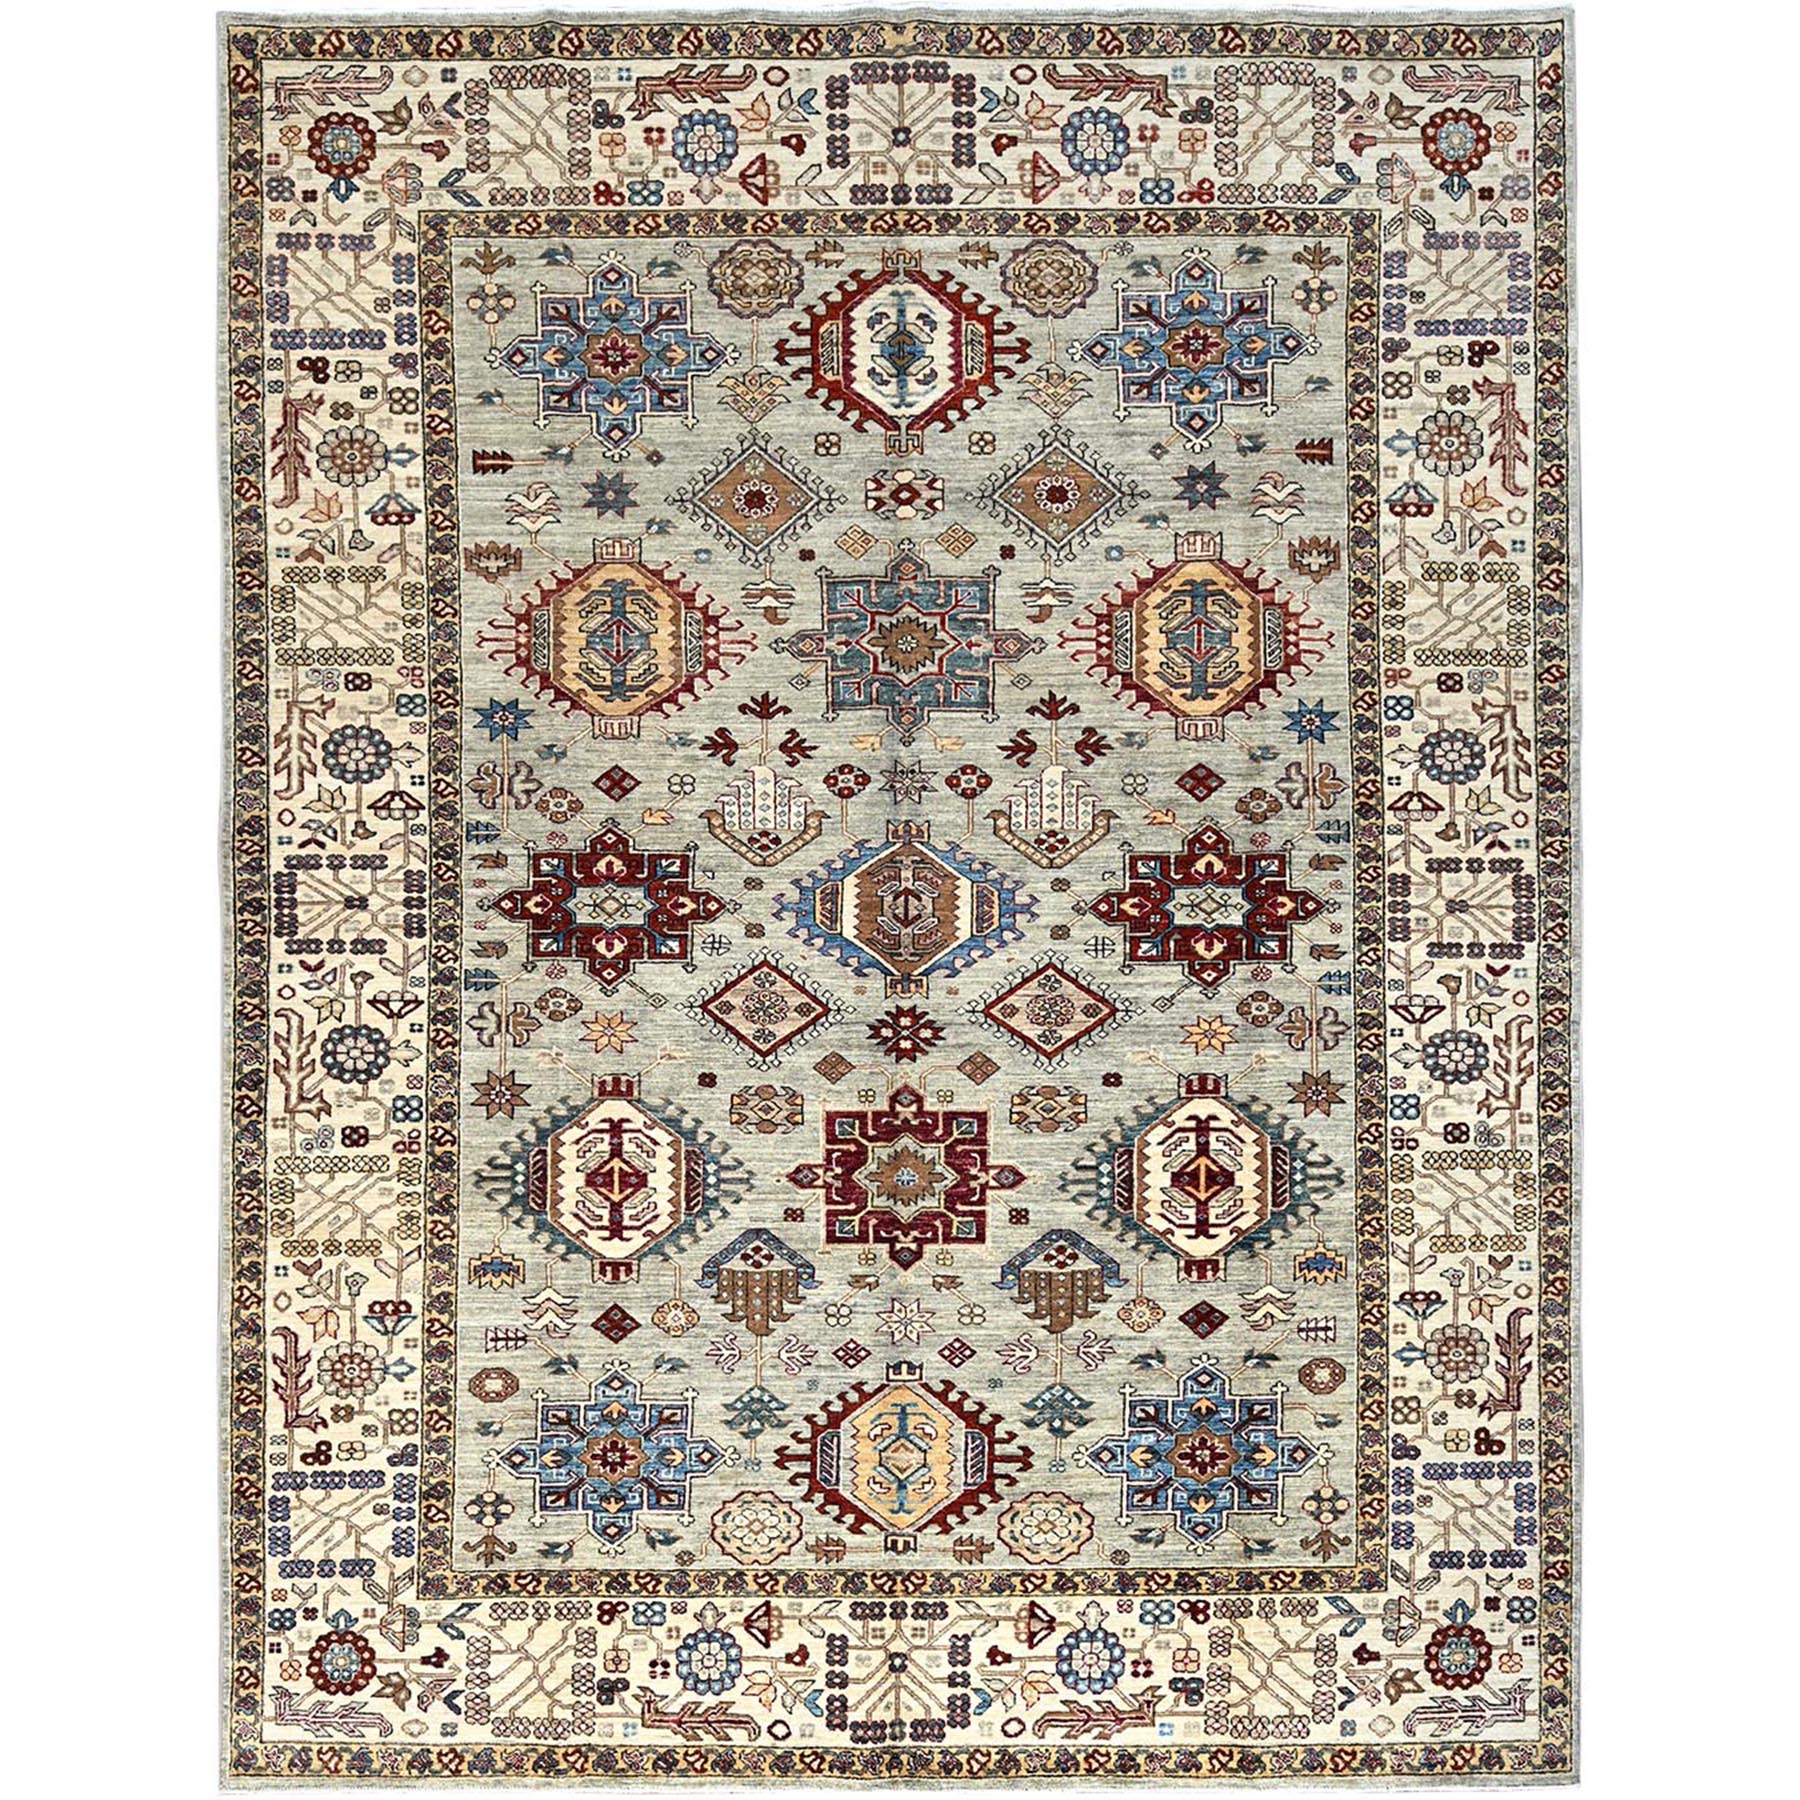 Spray Green, Alabaster White Border, Densely Woven Afghan Super Kazak with Tribal Medallions Design, Hand Knotted, Soft and Velvety Wool, Oriental Rug